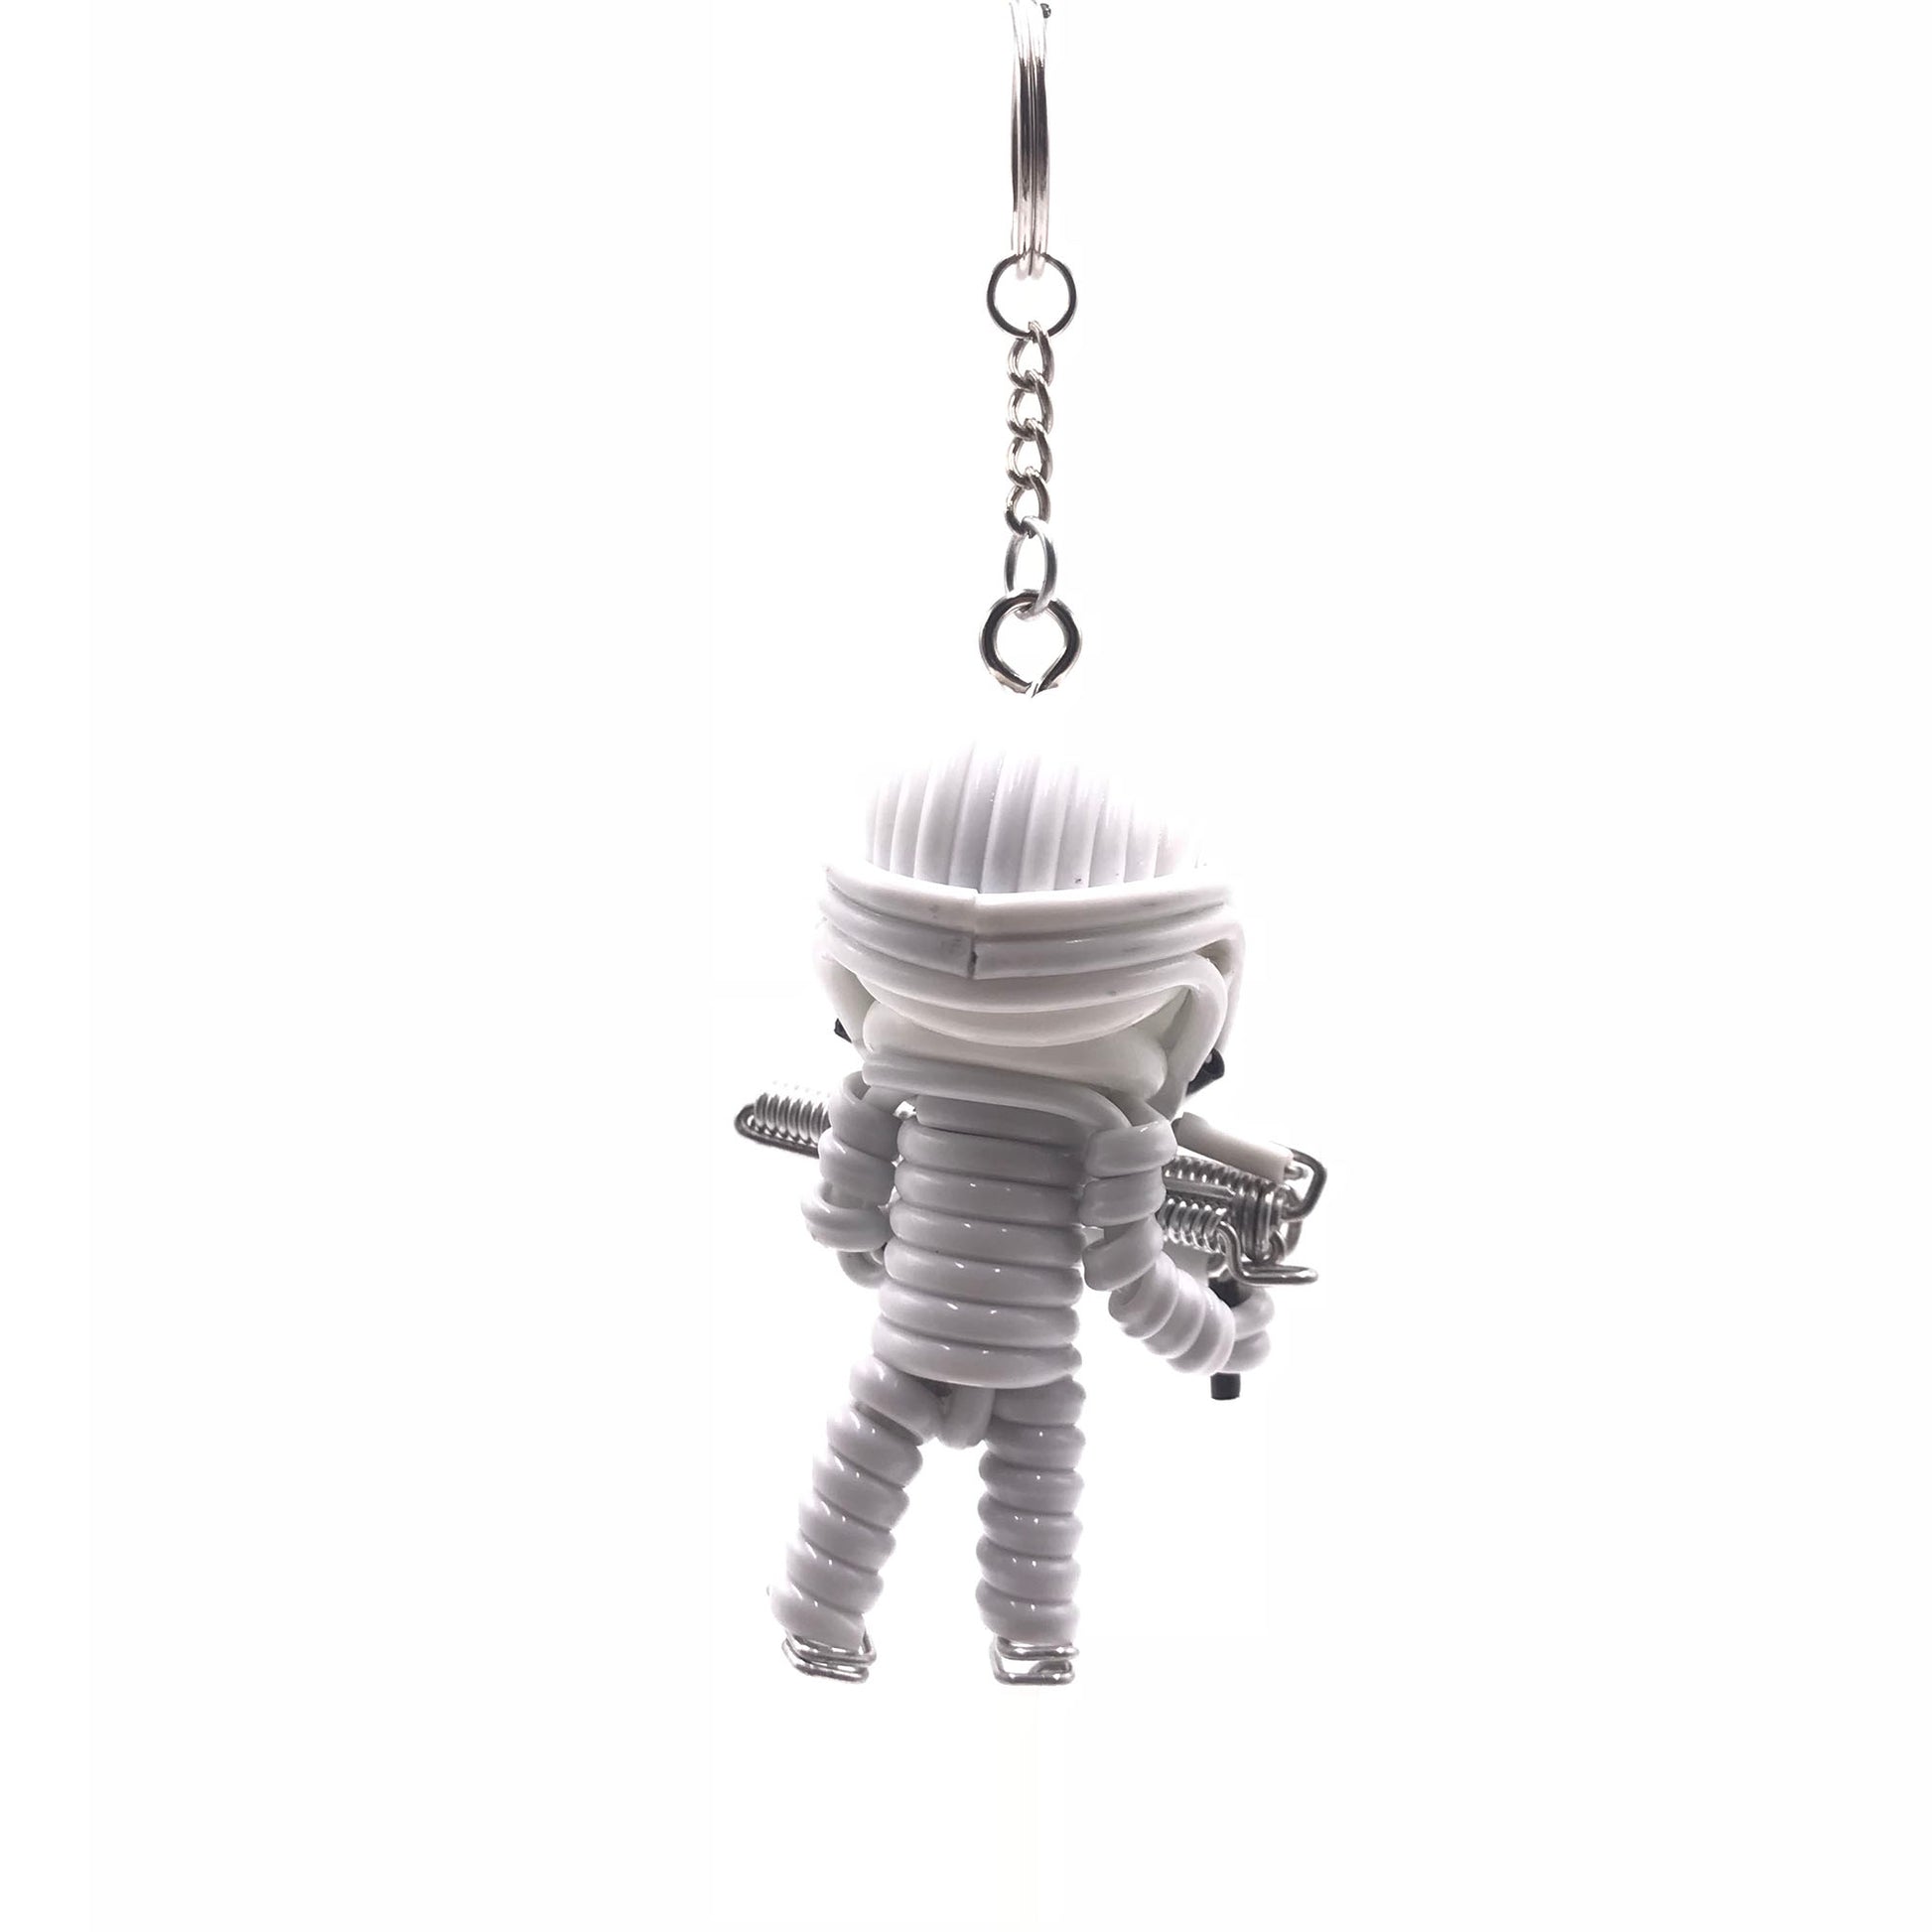 Miniature Wire Art storm trooper Keychain hand-crafted from aluminium wire